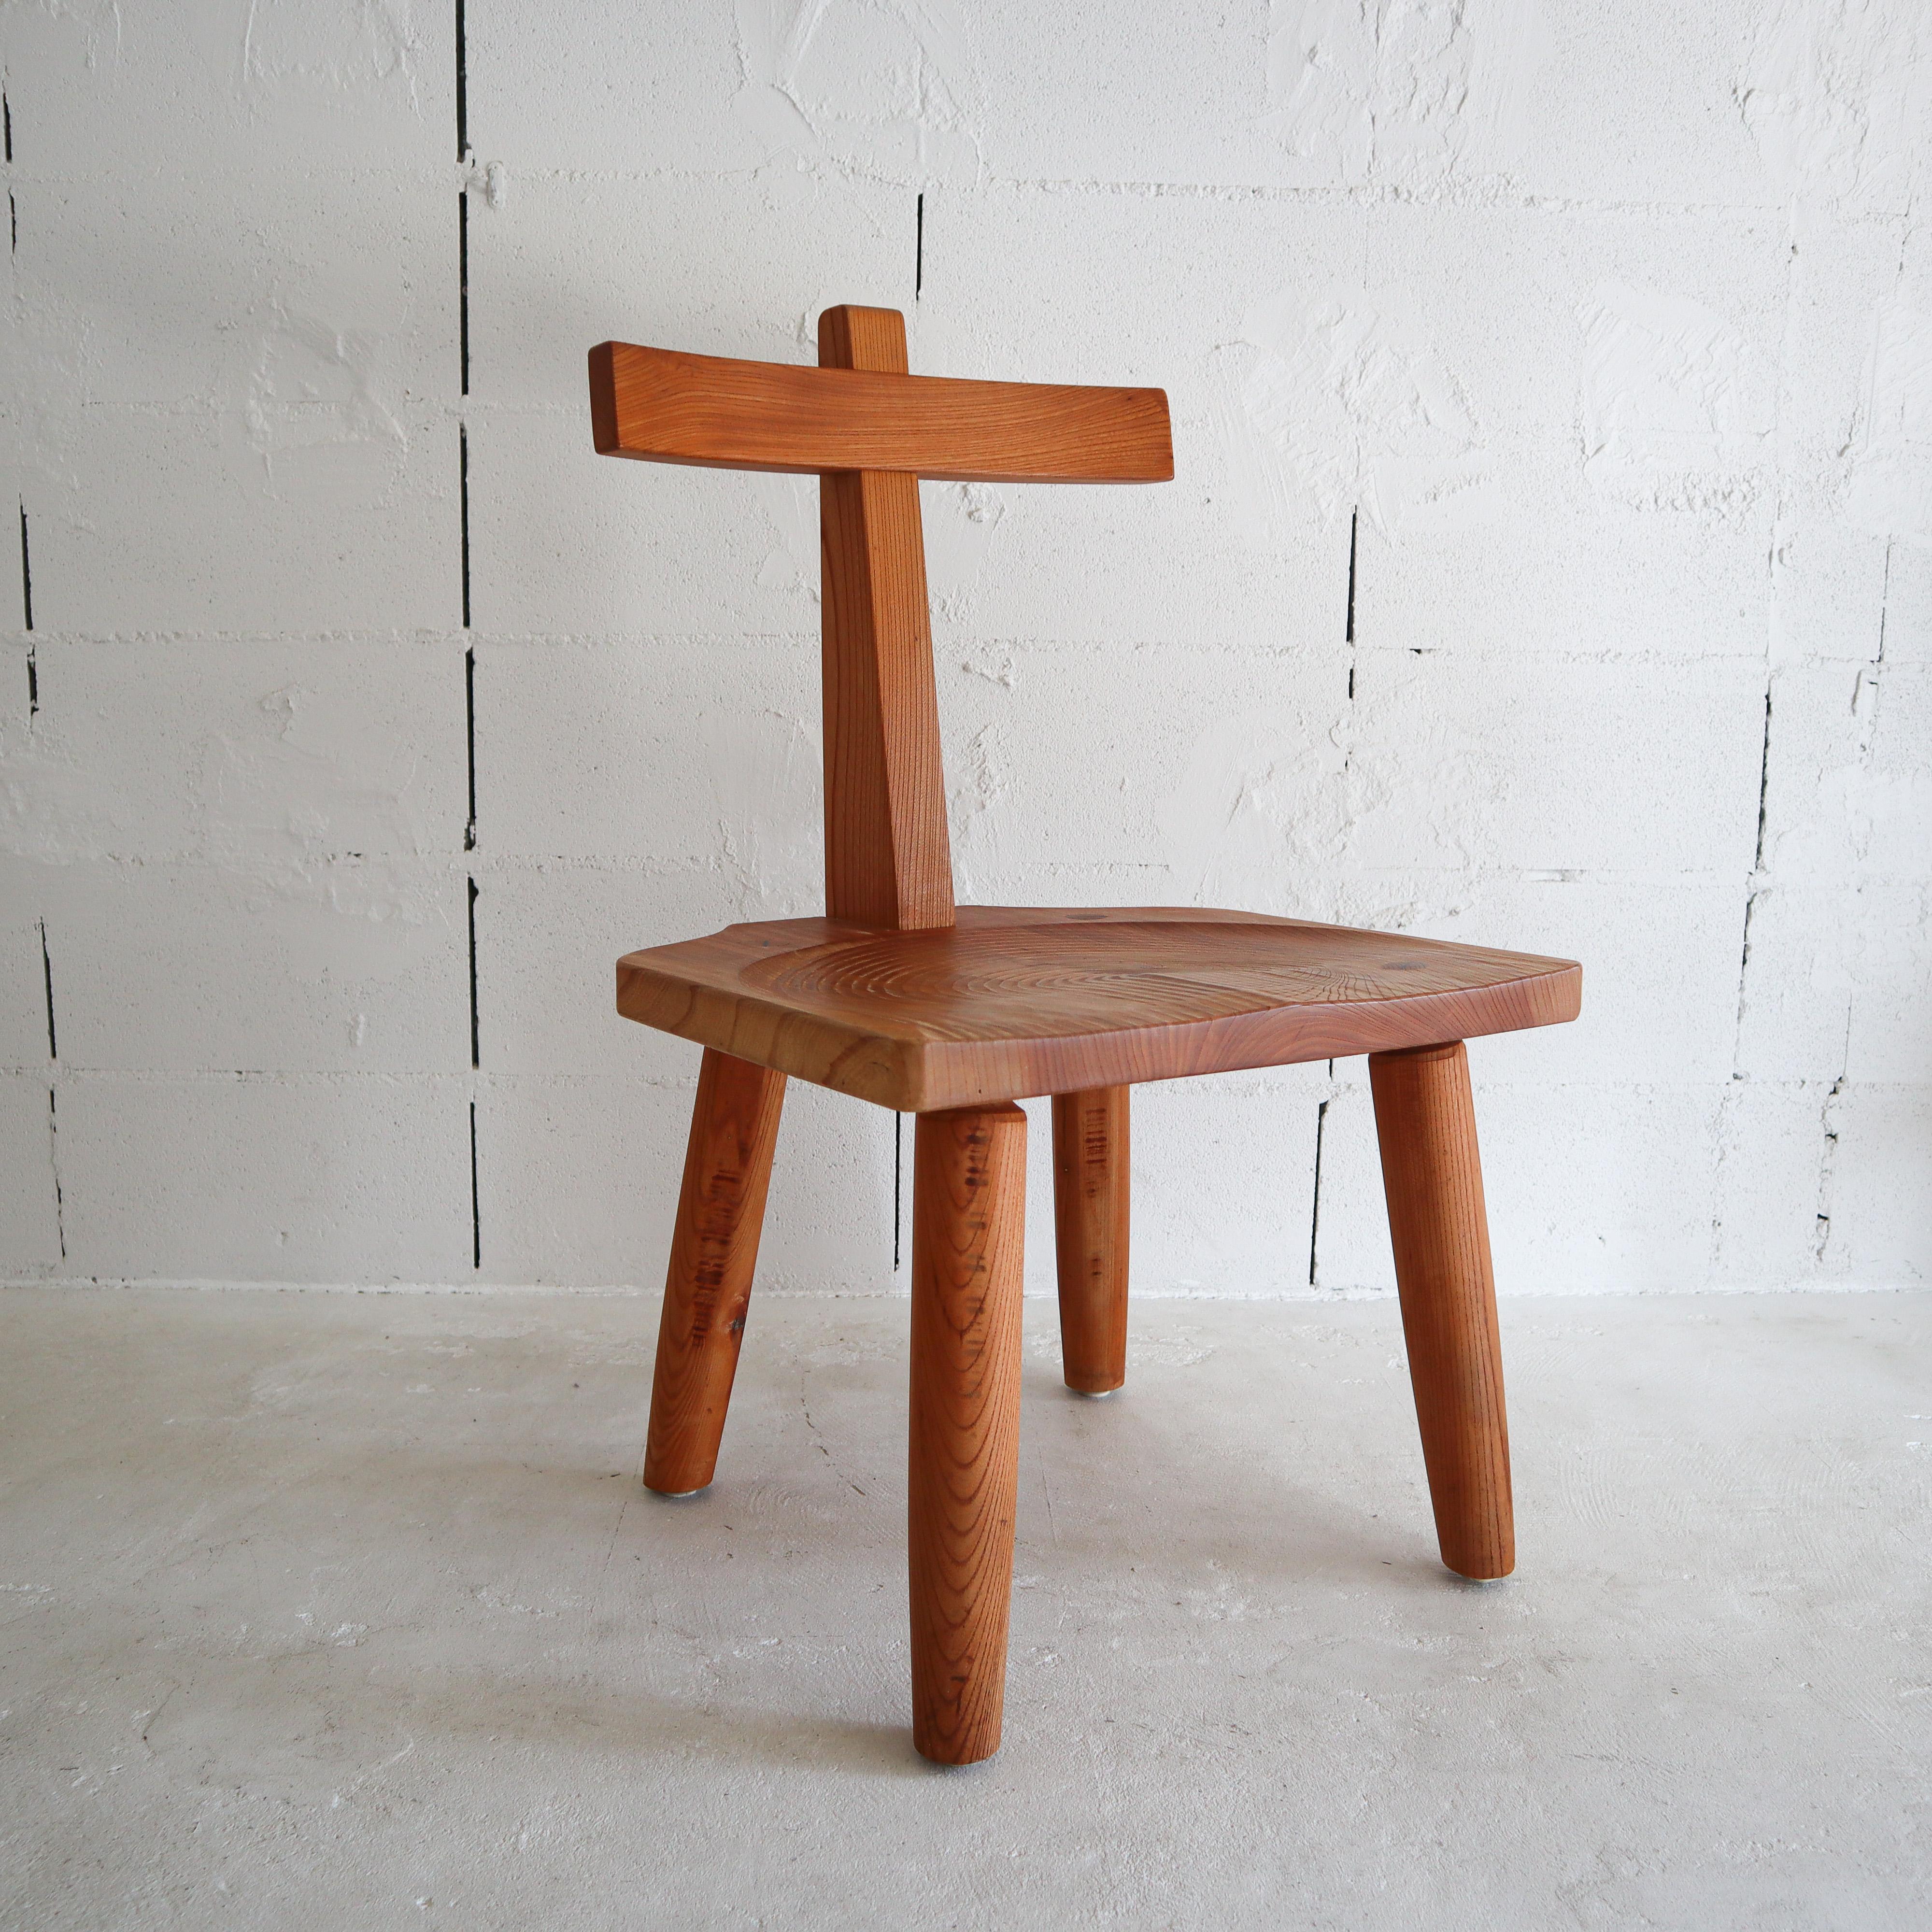 japanese joinery chair